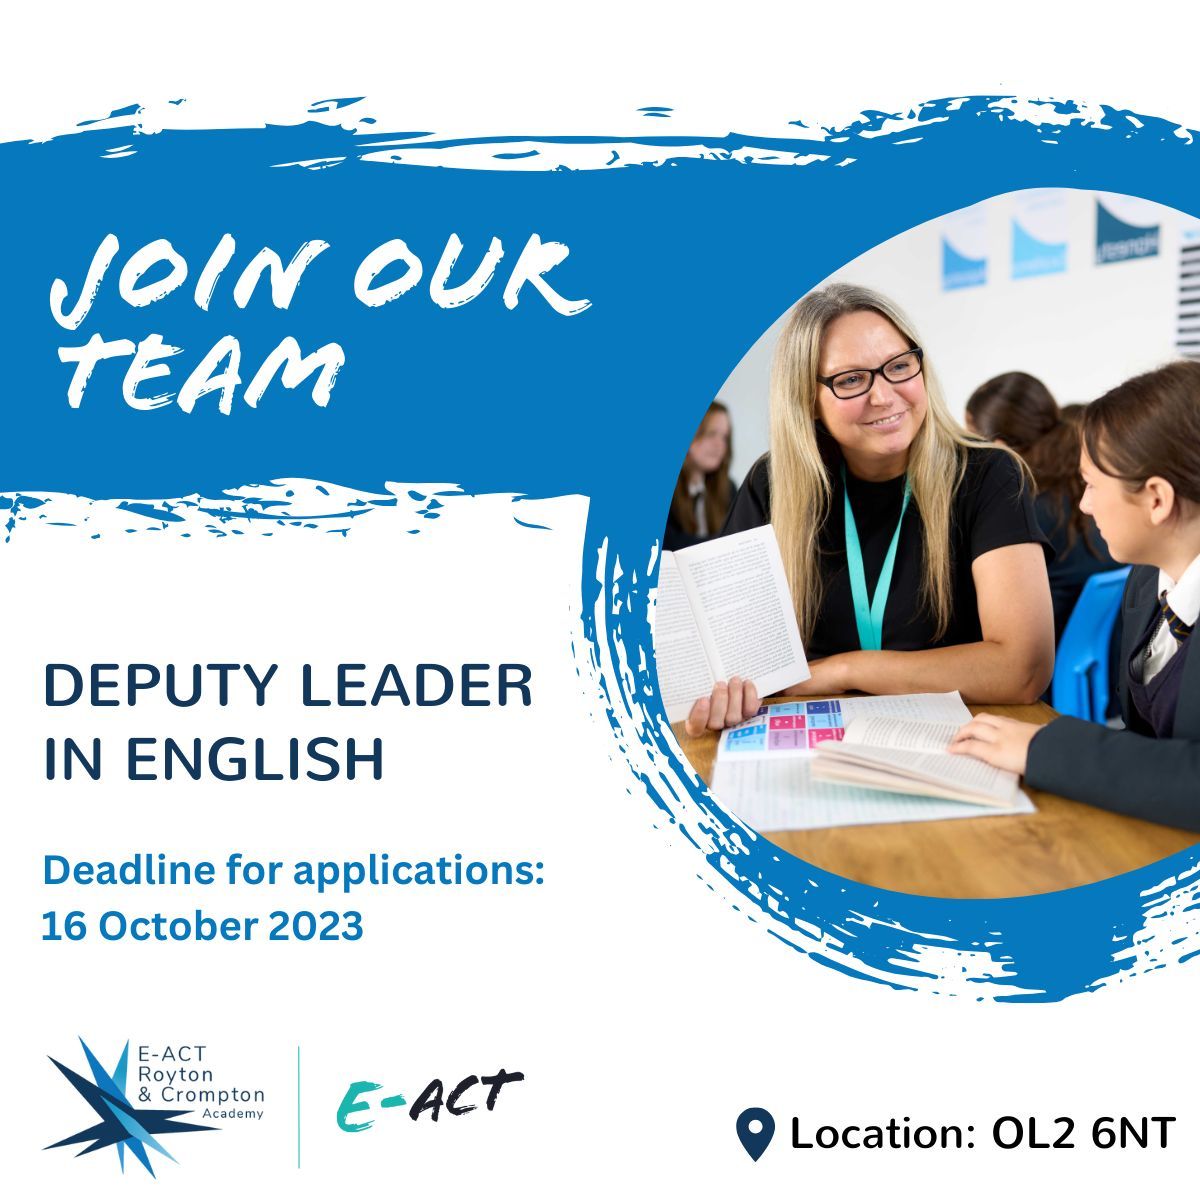 If you are an English teacher who is enthusiastic, committed to delivering the highest standards of teaching, and wish to support the development and delivery of English in KS 3&4; join our dedicated team here at E-ACT Royton and Crompton Academy. Apply: buff.ly/3LT55If